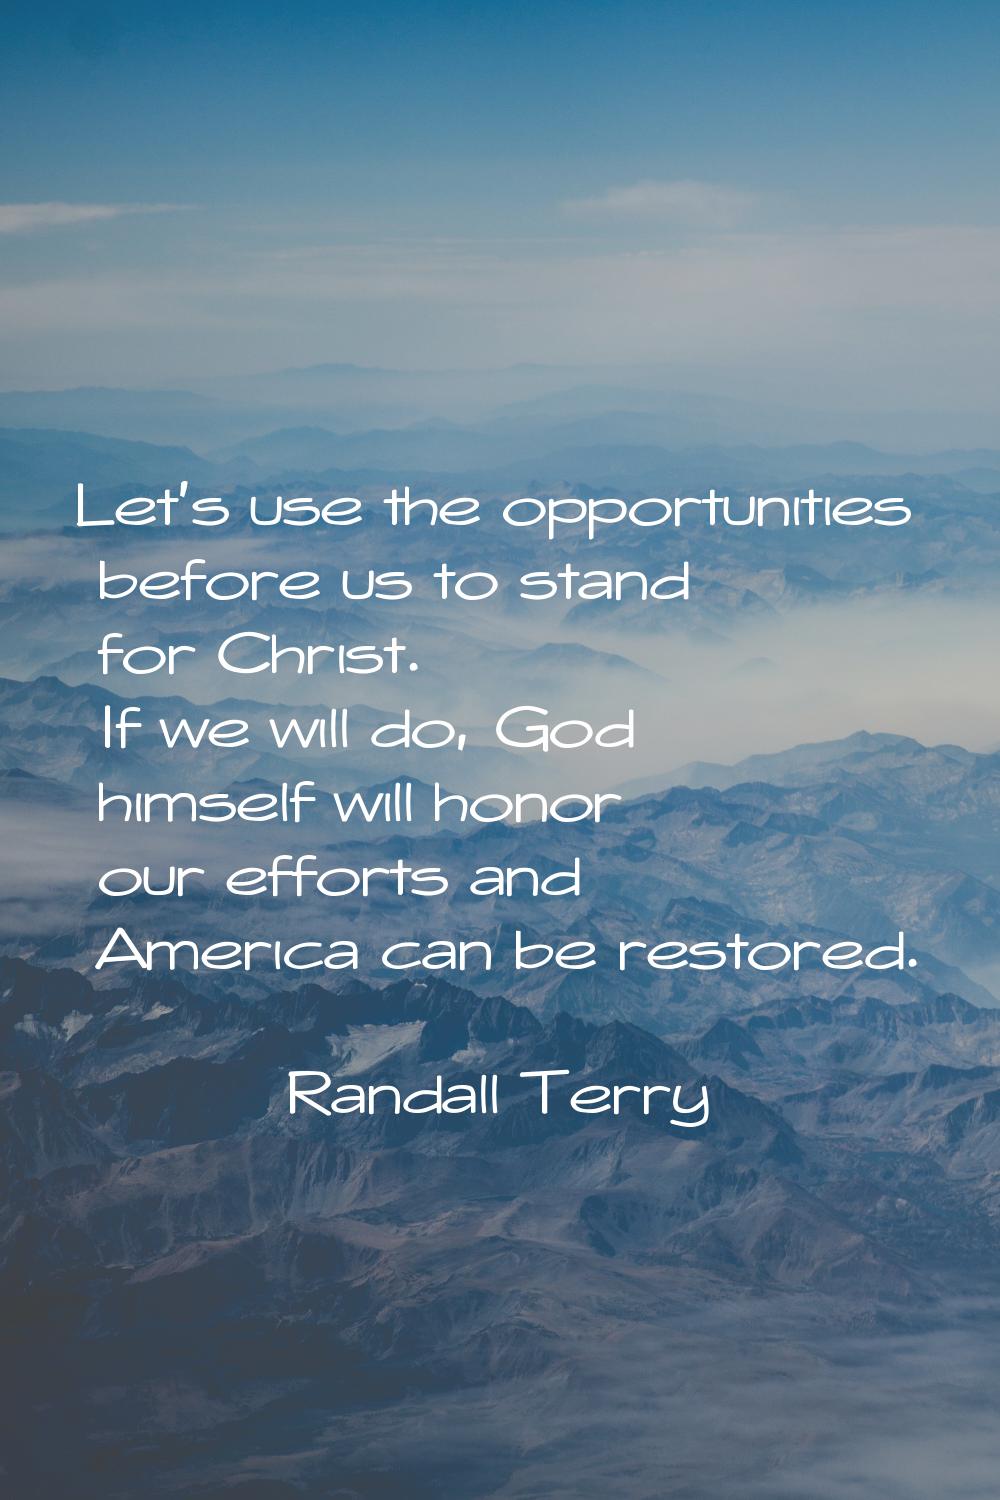 Let's use the opportunities before us to stand for Christ. If we will do, God himself will honor ou